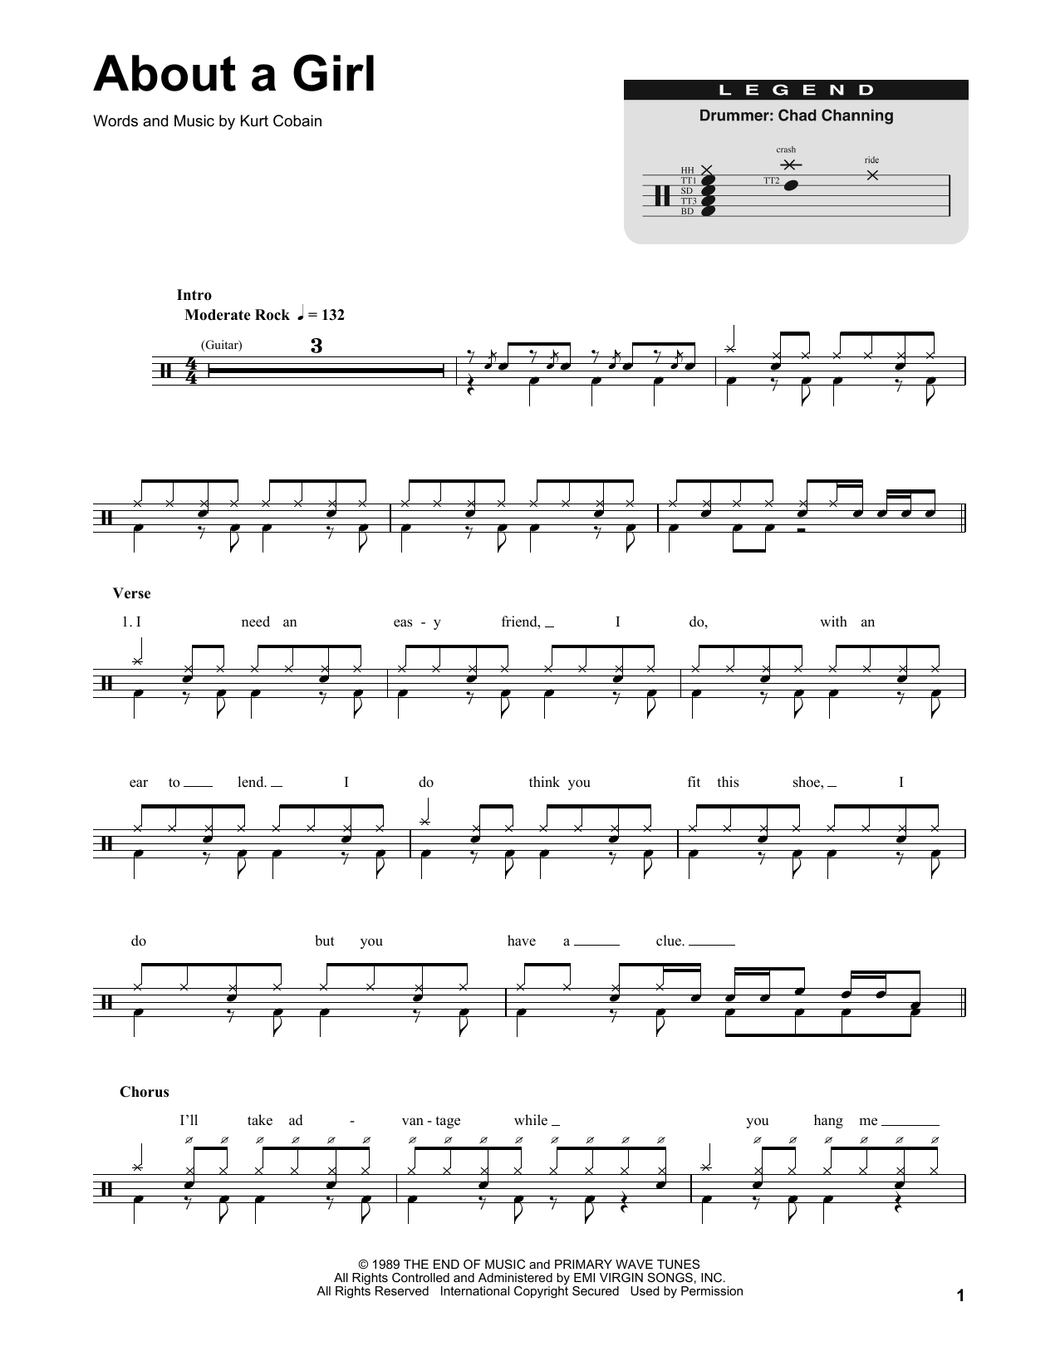 About a Girl - Nirvana - Full Drum Transcription / Drum Sheet Music - SheetMusicDirect DT